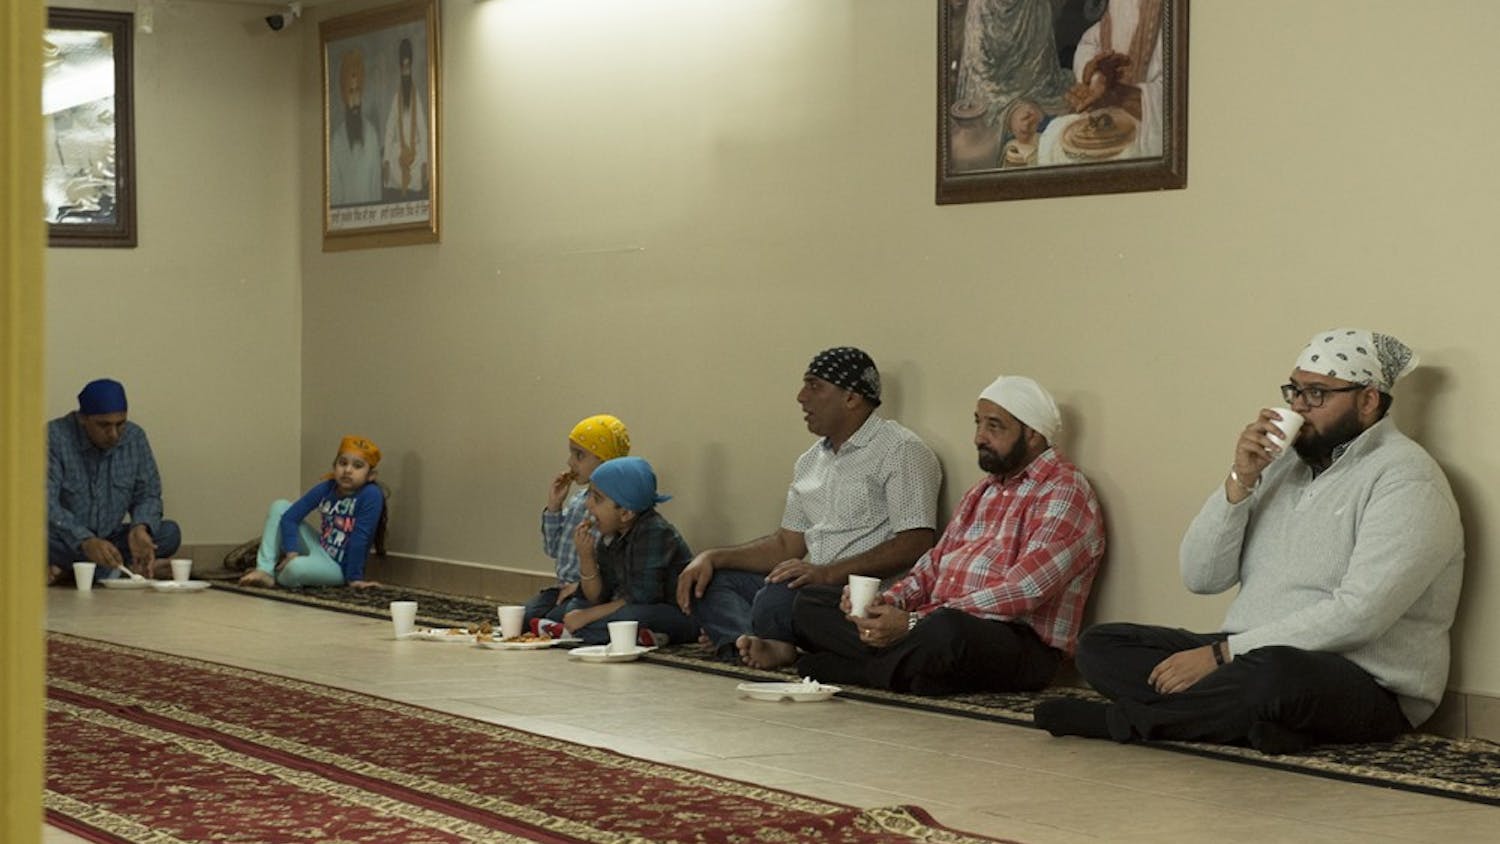 Sikhism practitioners having a meal at the basement of a Sikh Gurdwara in Fishers, Ind. They believe that having meals on the floor promotes equality. 
